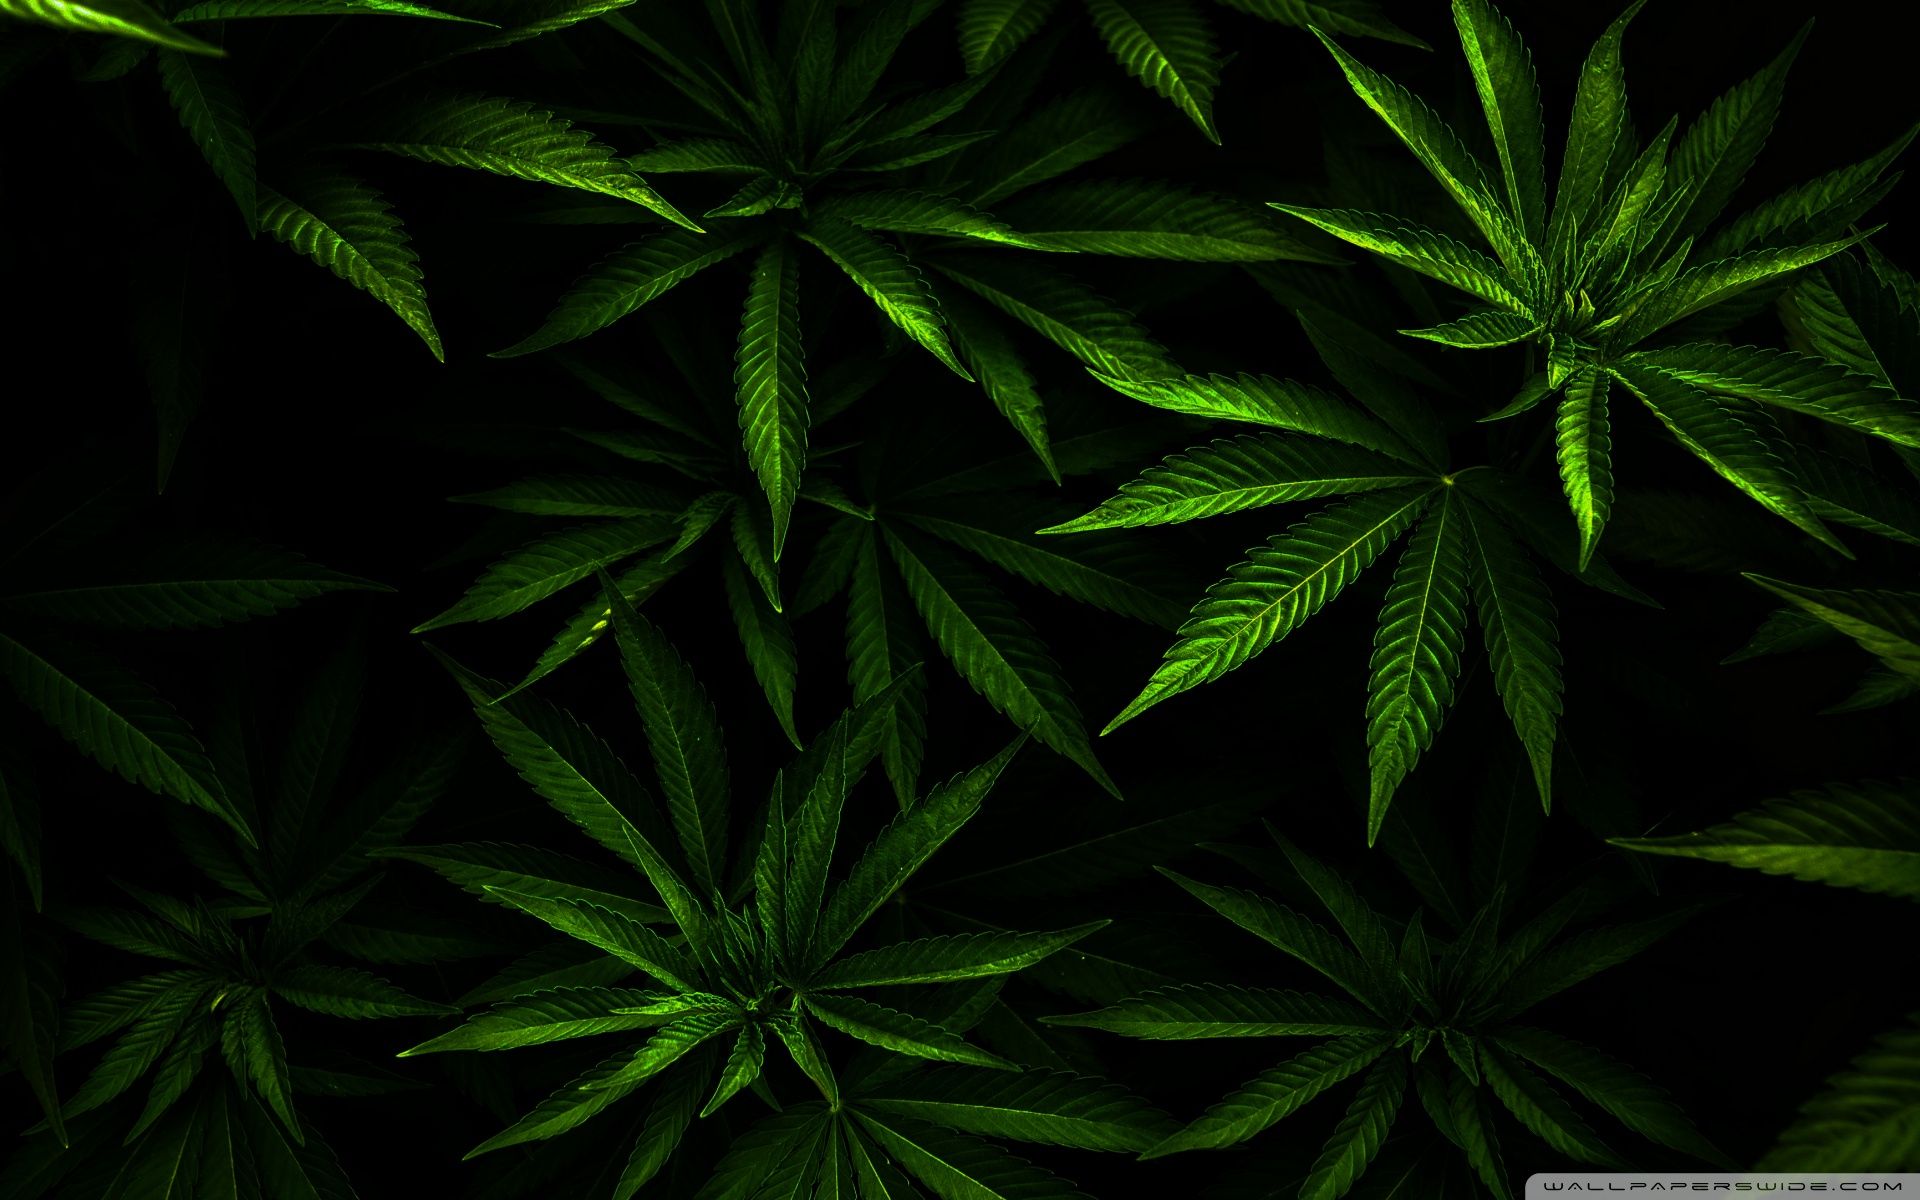 Weed Wallpaper for Desktop. Weed Girl Wallpaper, Popular Weed Wallpaper and Funny Weed Background